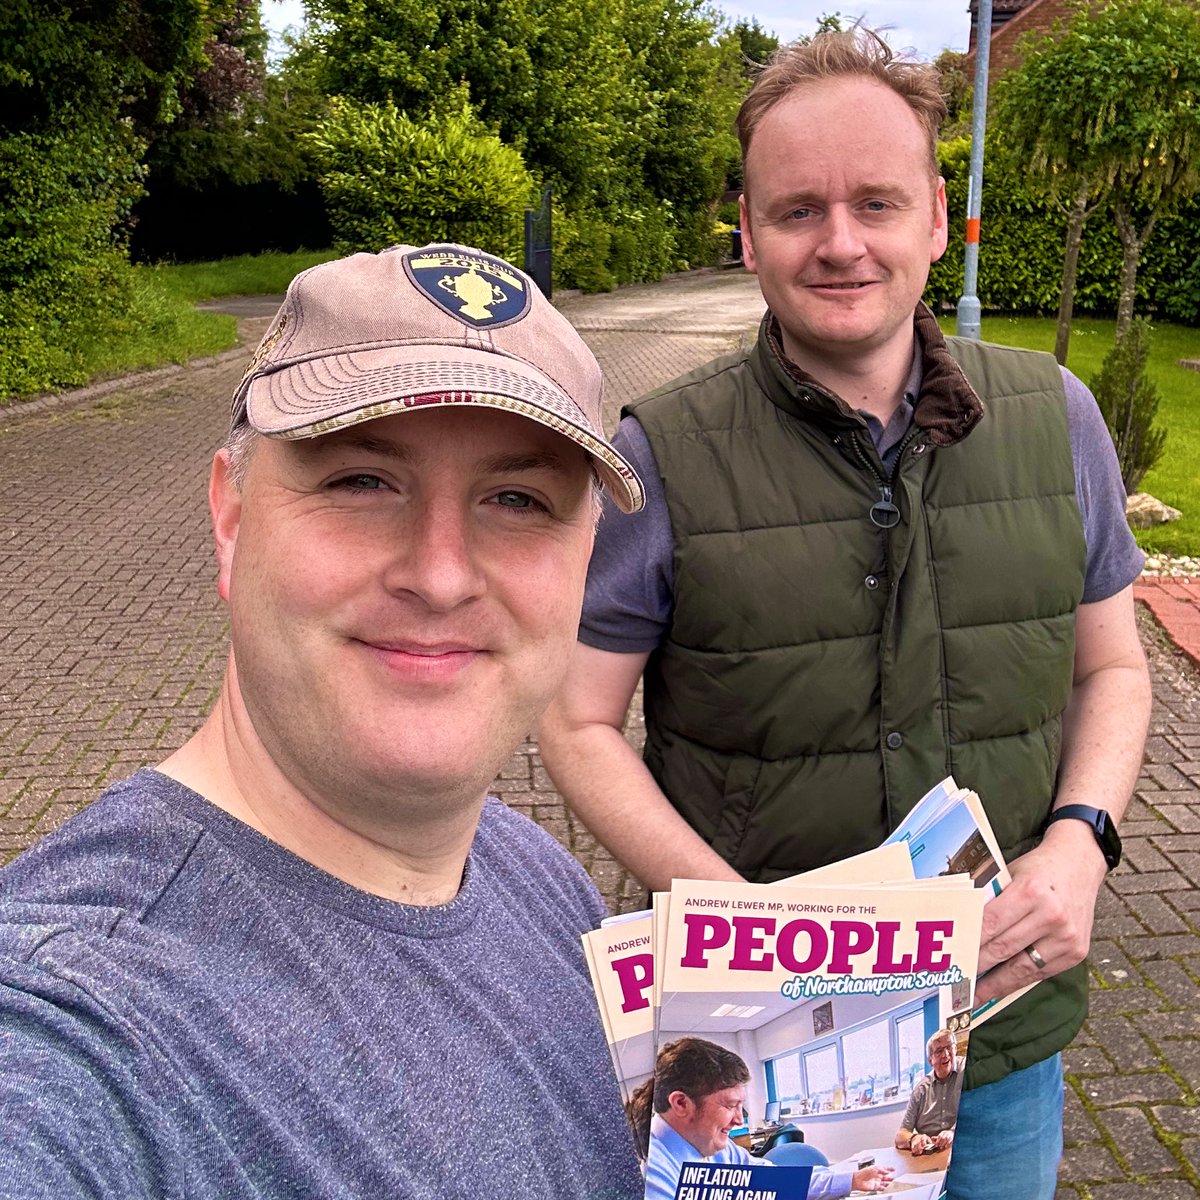 Out on the doorsteps today supporting @ALewerMBE in #NorthamptonSouth #VoteConservative #GE24